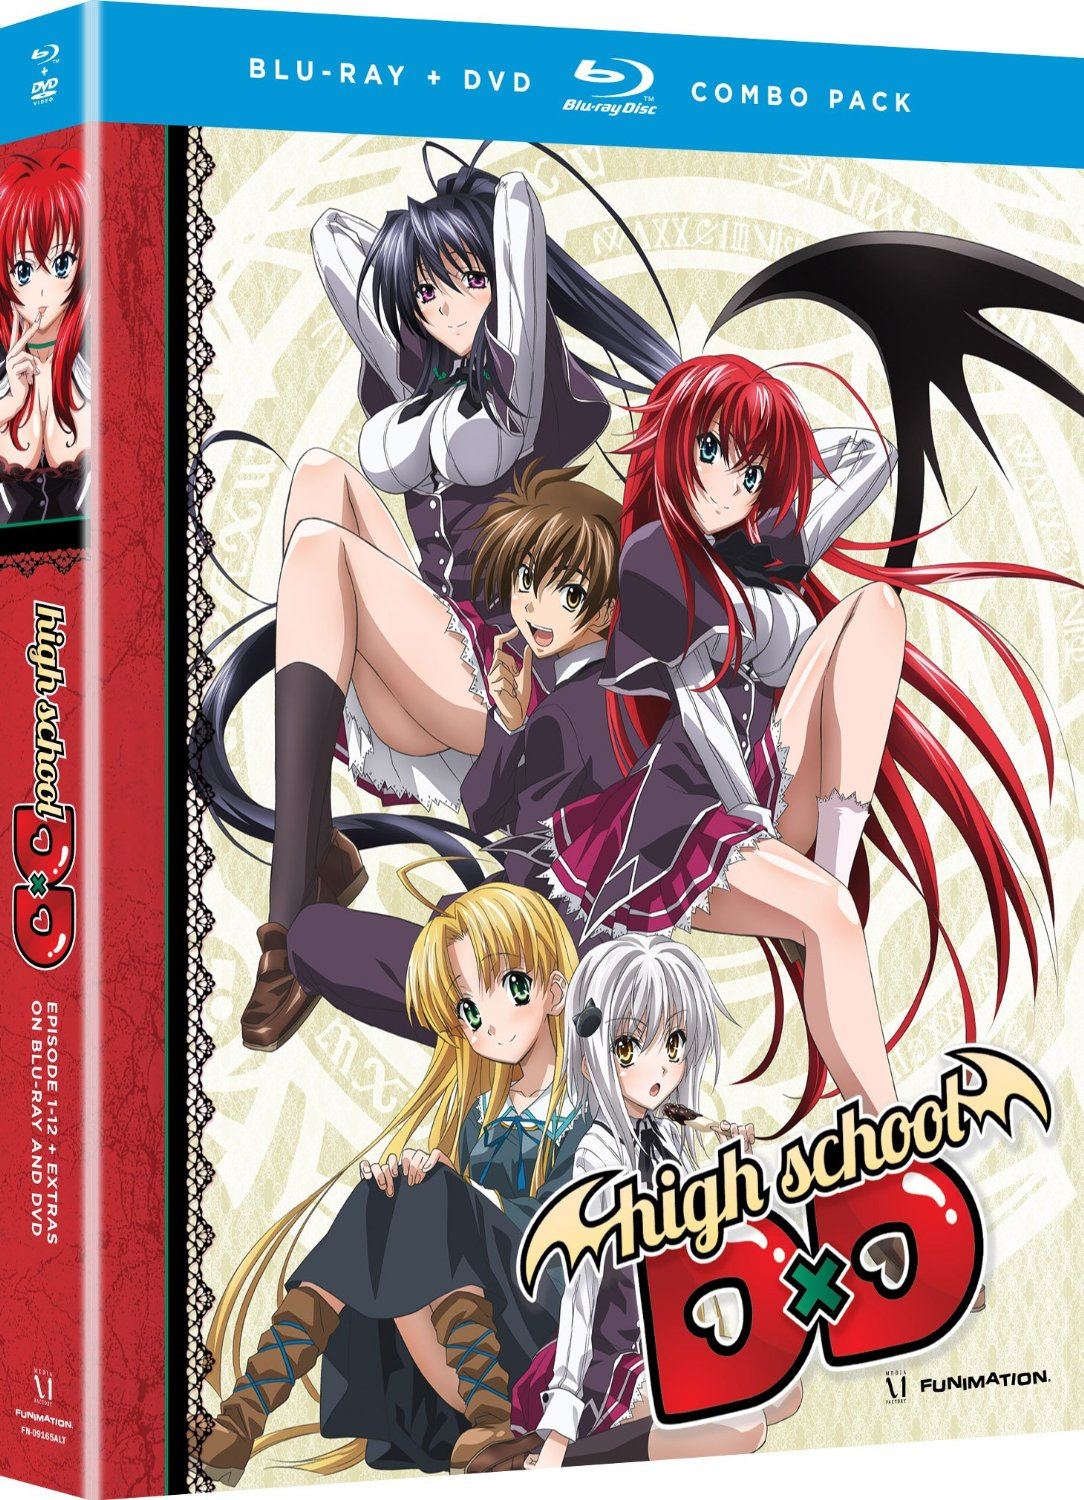 diane kays add photo all episodes of highschool dxd